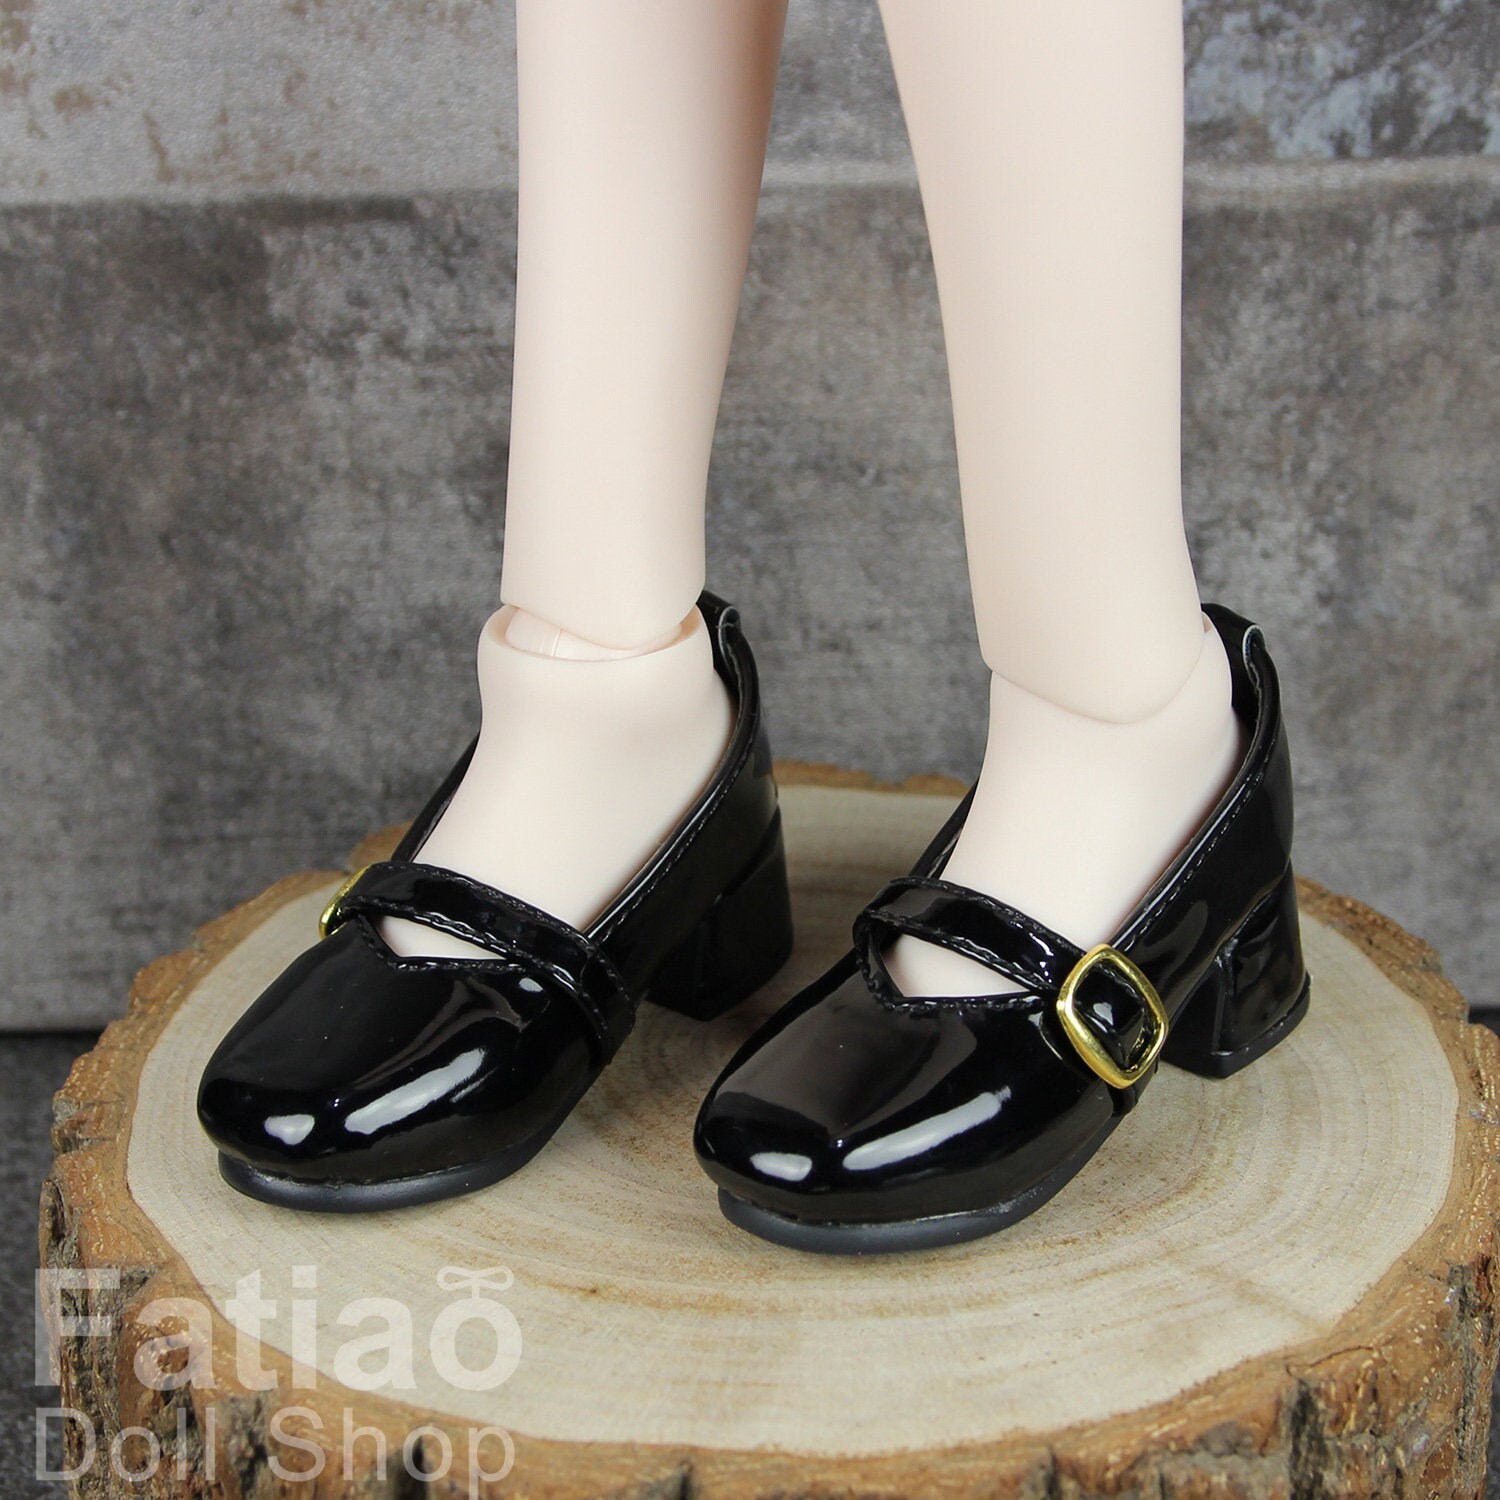 Black 1/3 Cute Student Leather Shoes for Women BJD SD Doll Model 